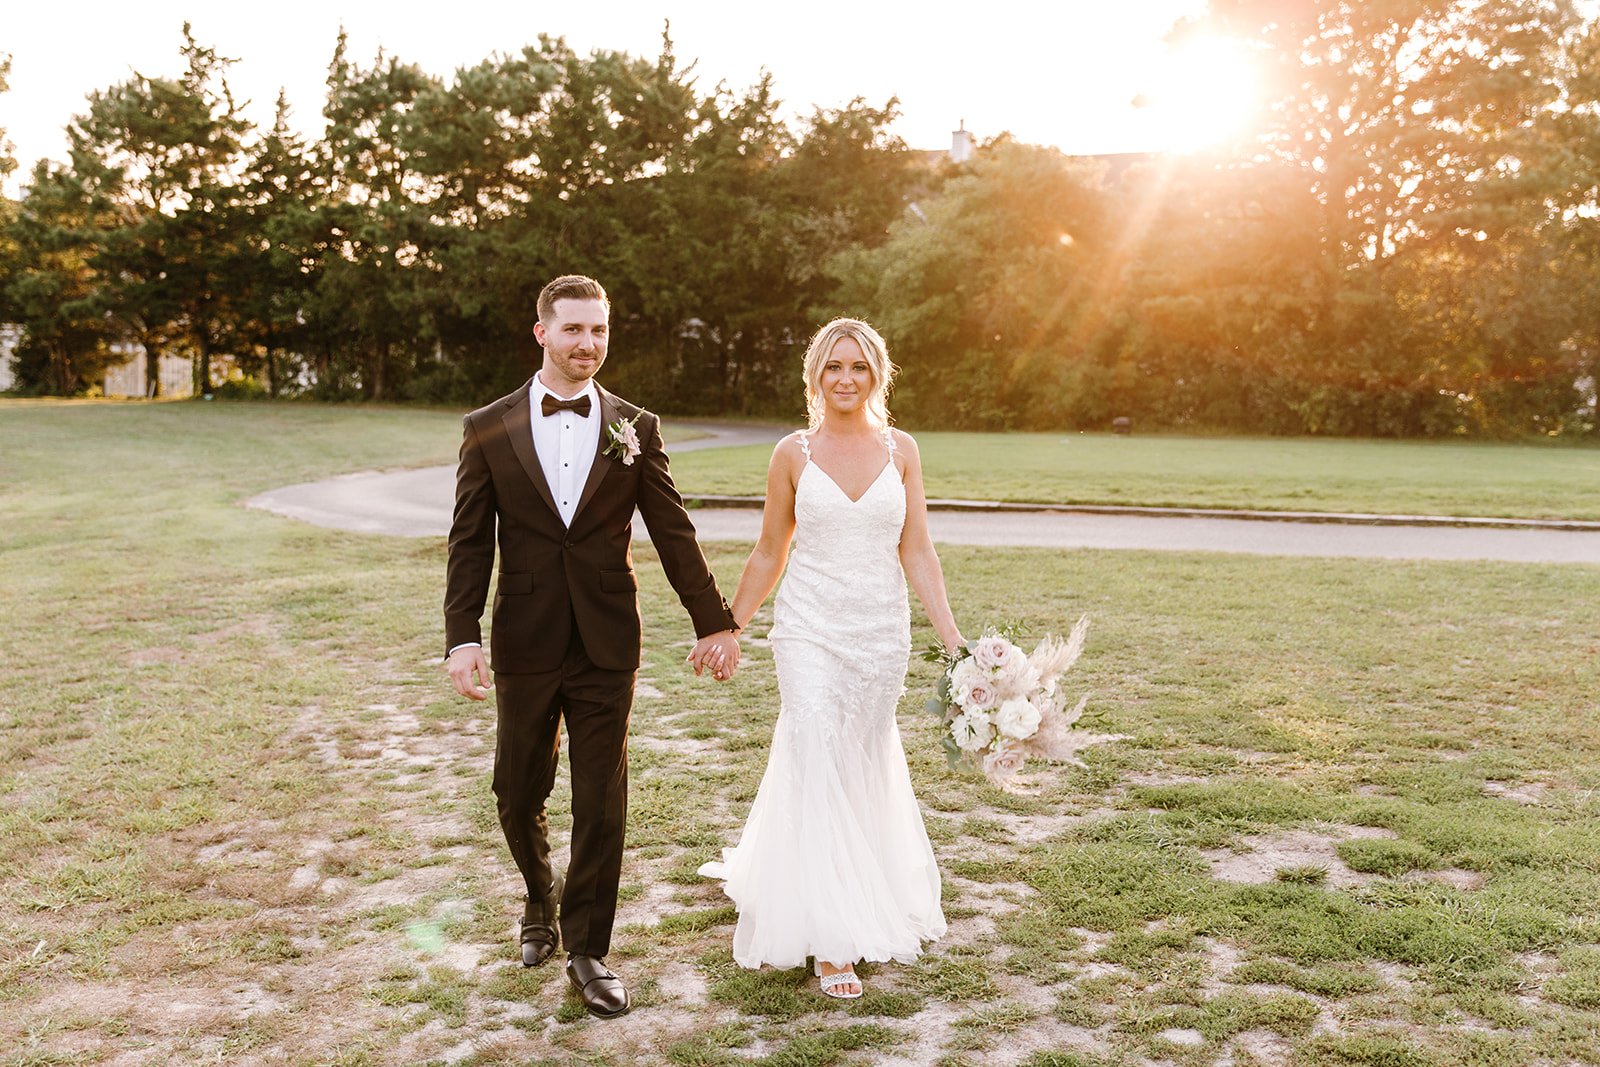 A Sophisticated New Jersey Wedding At Blue Heron Pines Golf Course: Brianna + Vinny